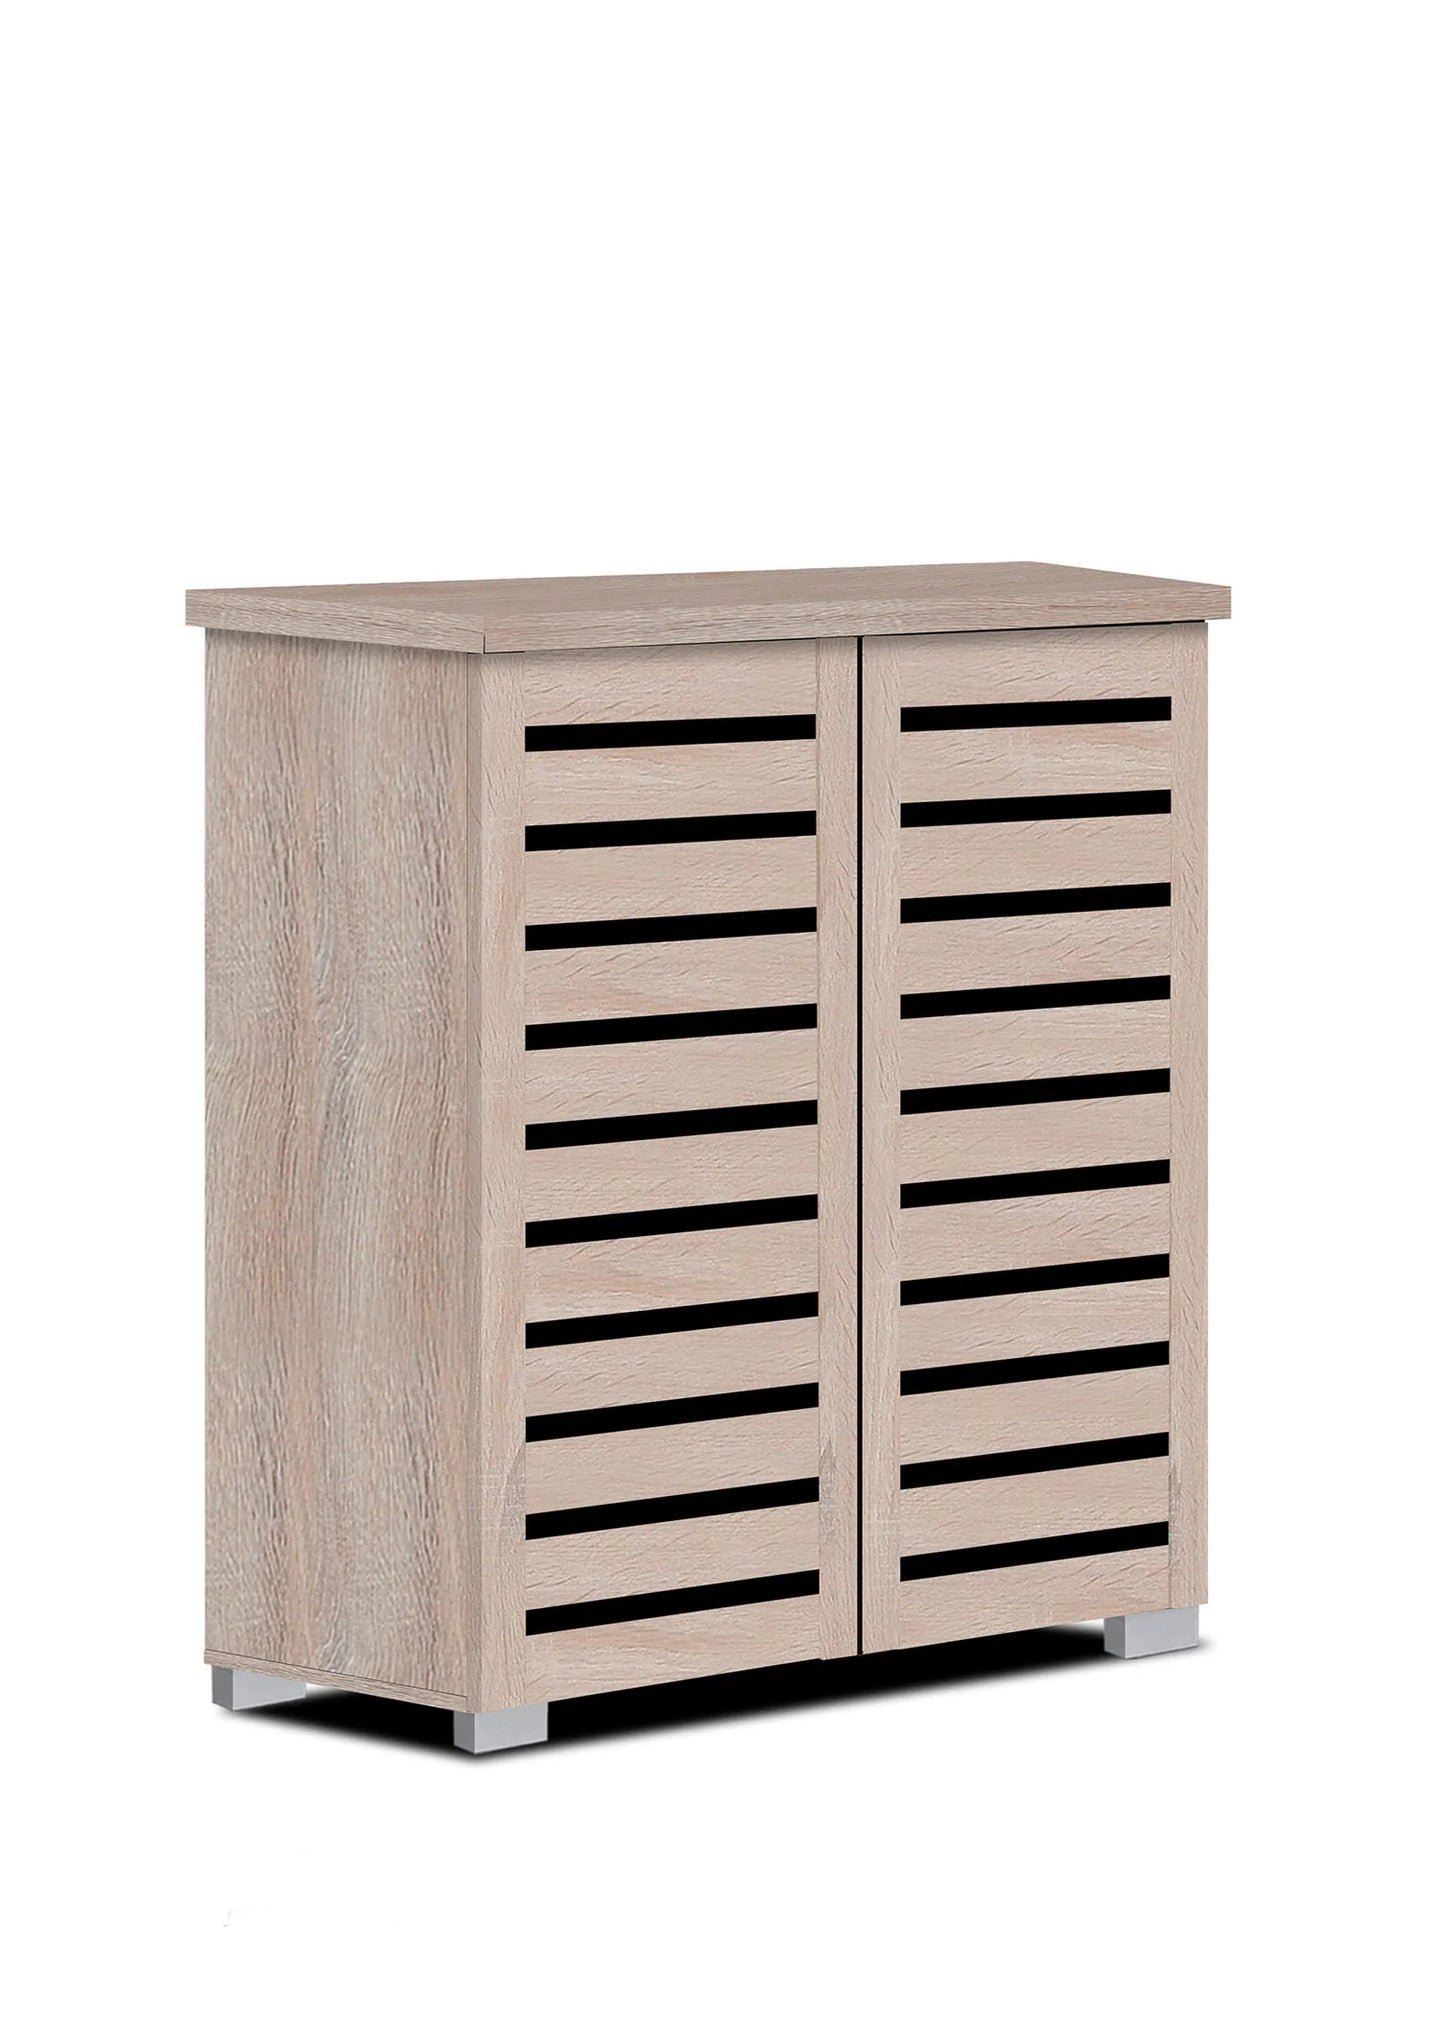 Shoe Cabinet 4 Shelves Comes in Espresso or Natural Finish